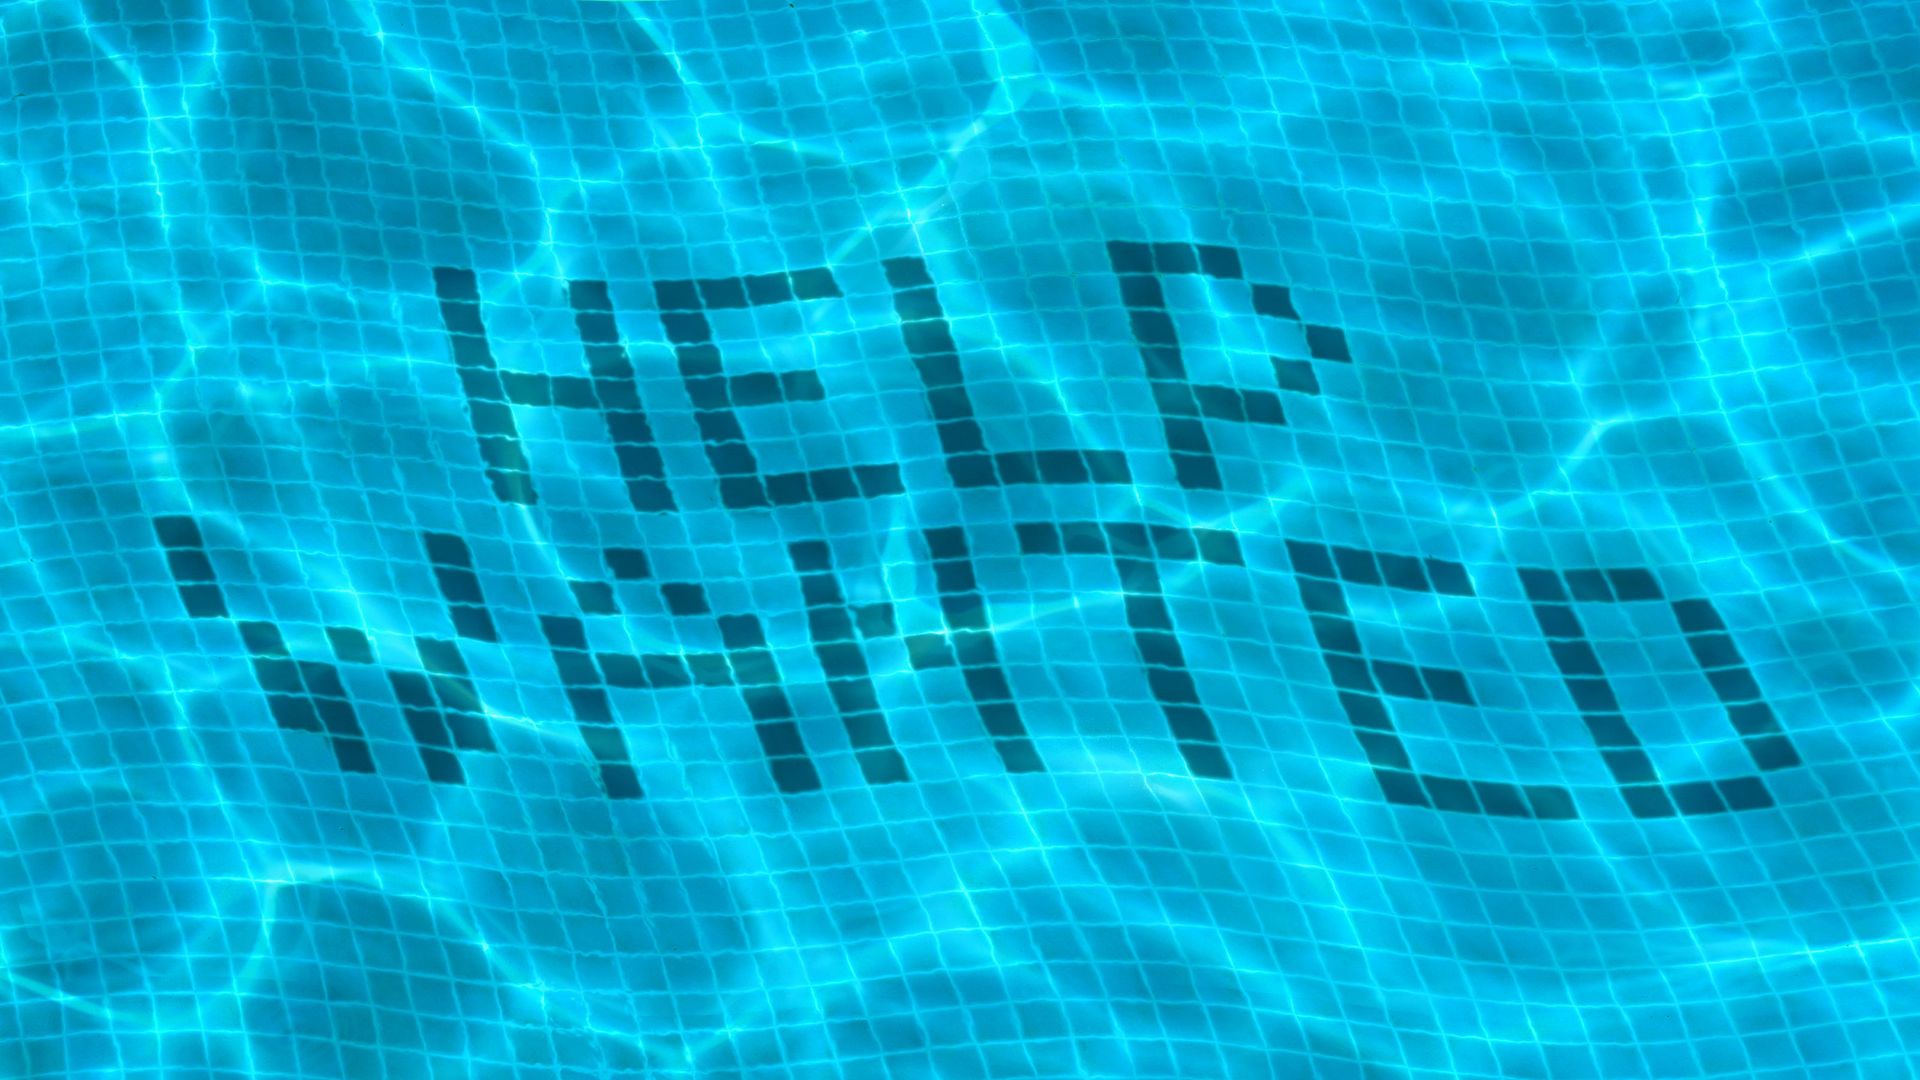 Illustration of "Help Wanted" written at the bottom of a pool.